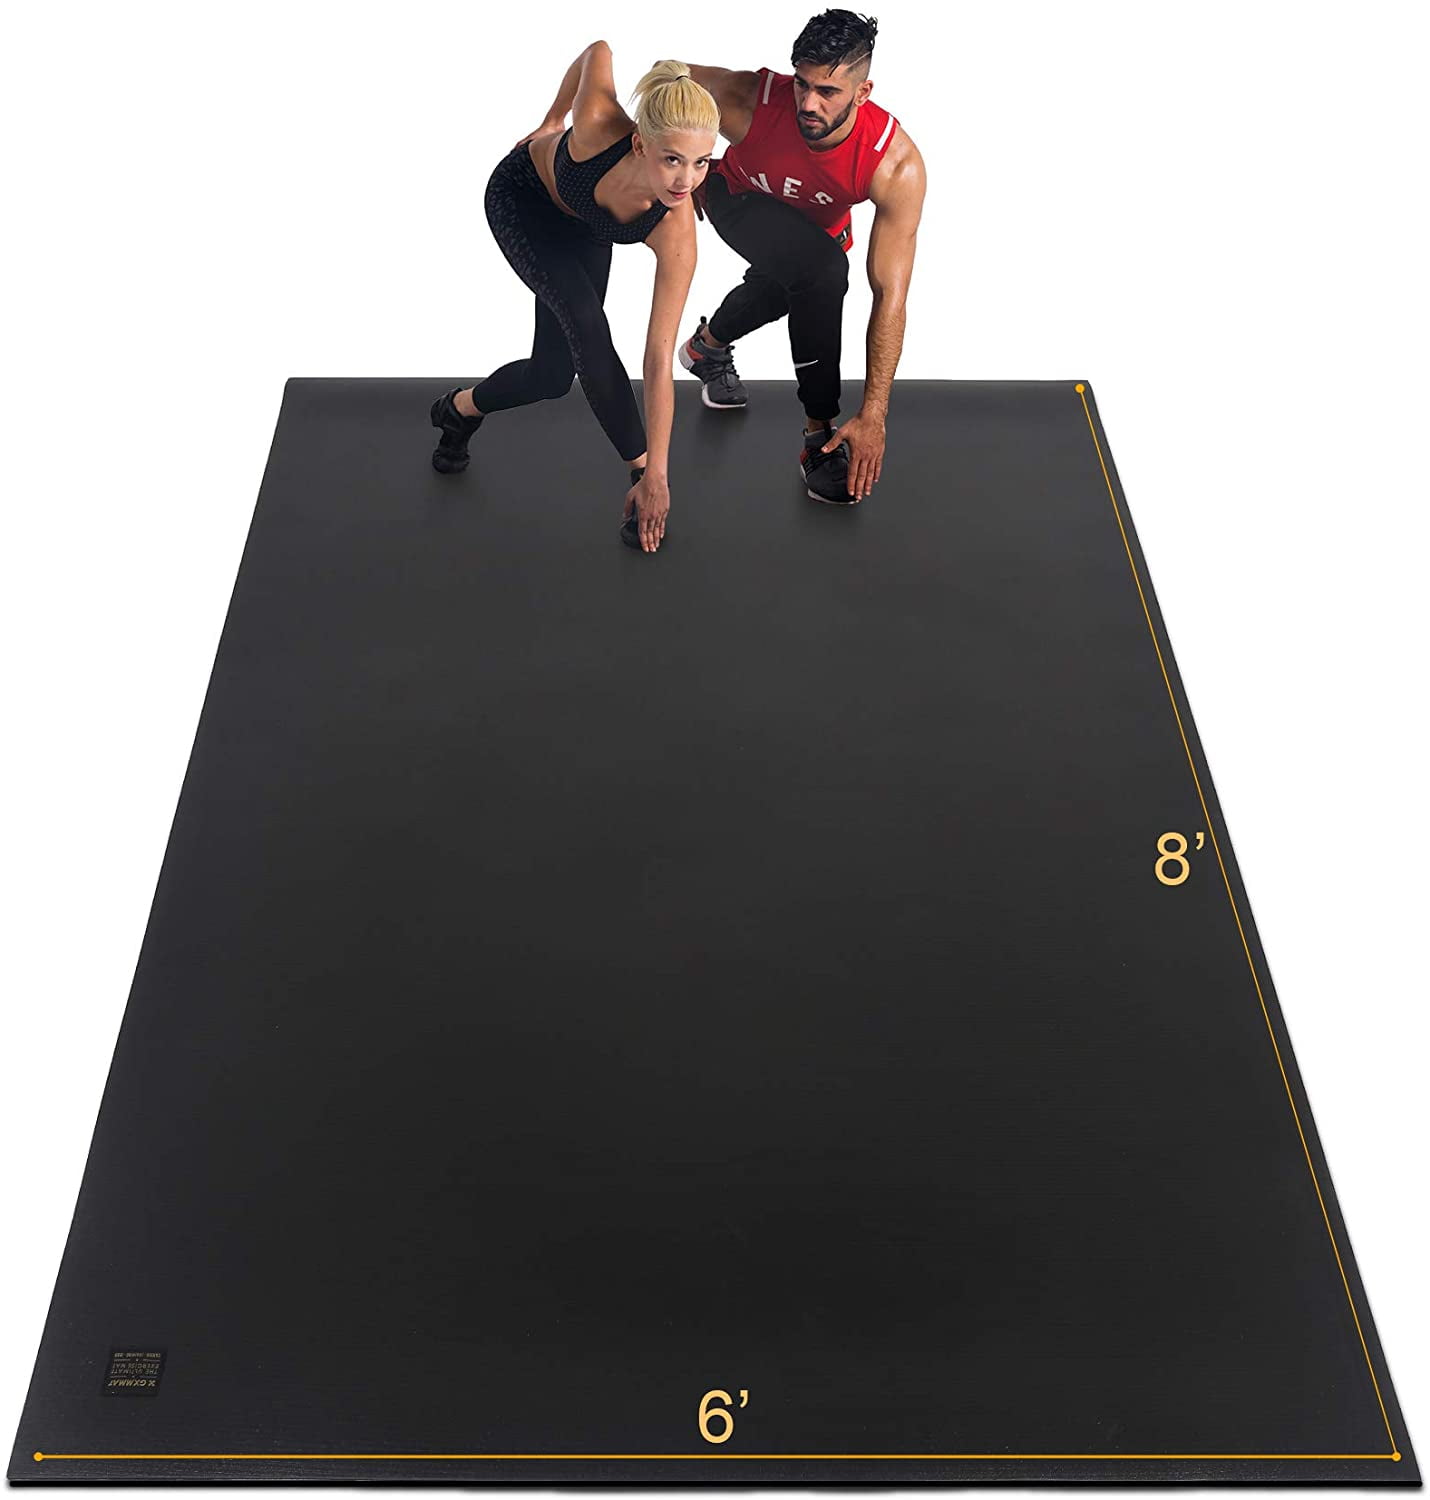 Ultra Durable Non-Slip Jump Thick Gym Flooring Mats for Cardio Eco Friendly Shoe Friendly Plyo MMA Weightlifting Premium Large Exercise Mat for Home Workout 7 x 4.5 x 7mm 